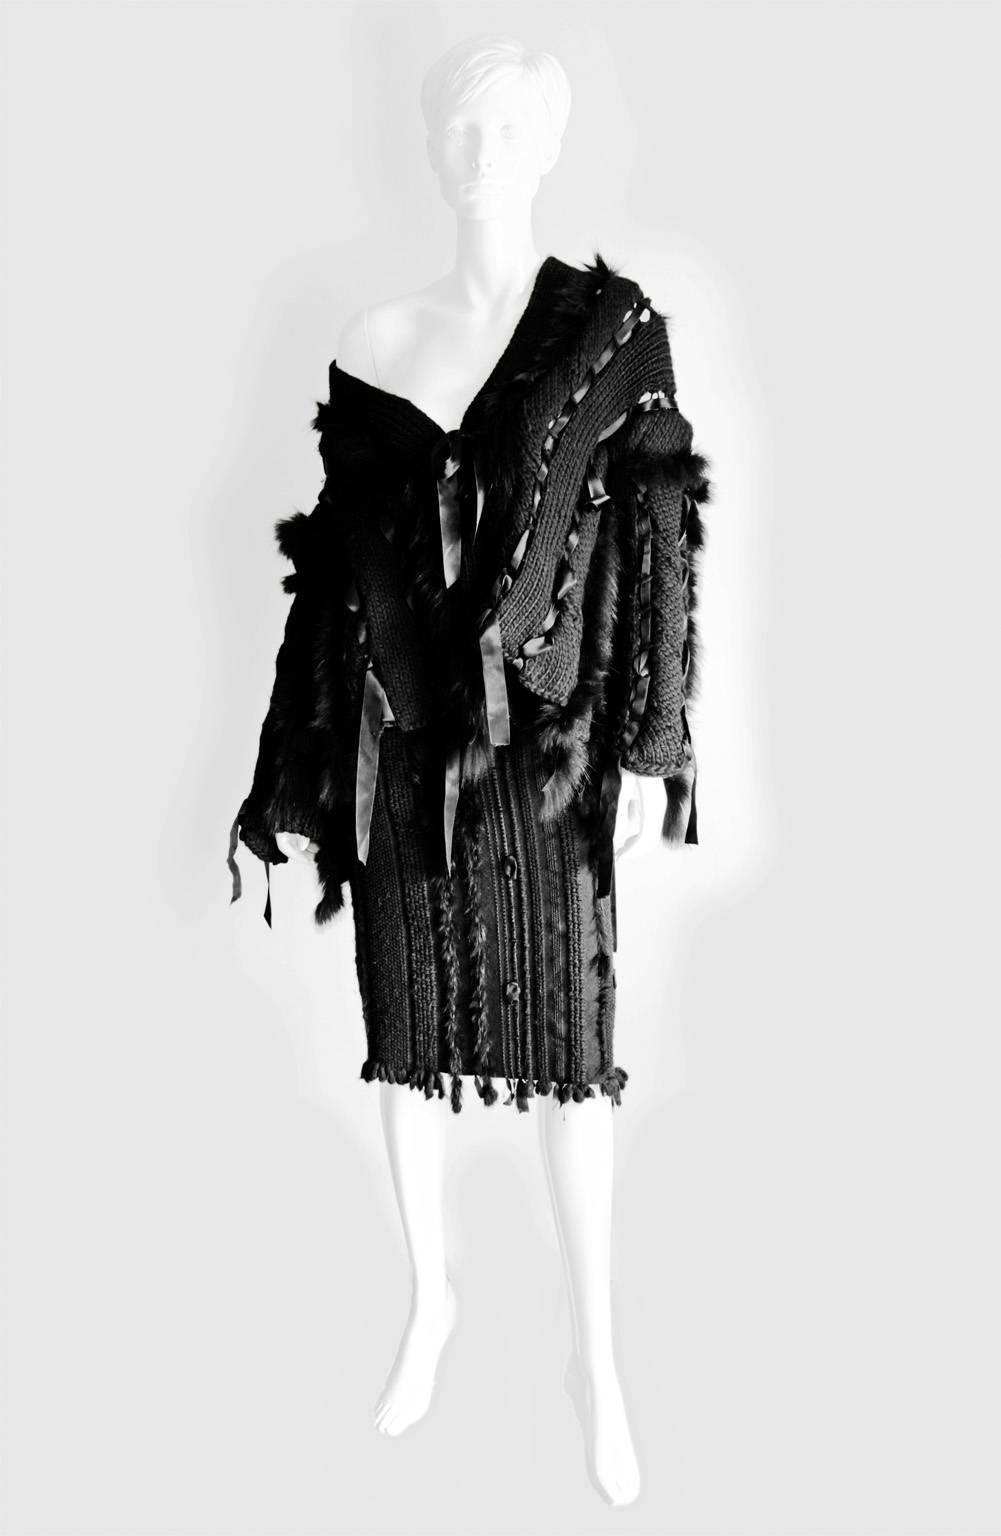 Amazing Tom Ford Gucci FW 2002 Runway Collection Mink & Silk Trimmed Jacket & Skirt!

This truly heavenly jacket & skirt are made from an amazing macrame-esque weave of cashmere & wool with mink fur & silk ribbon work. This gorgeous set is an